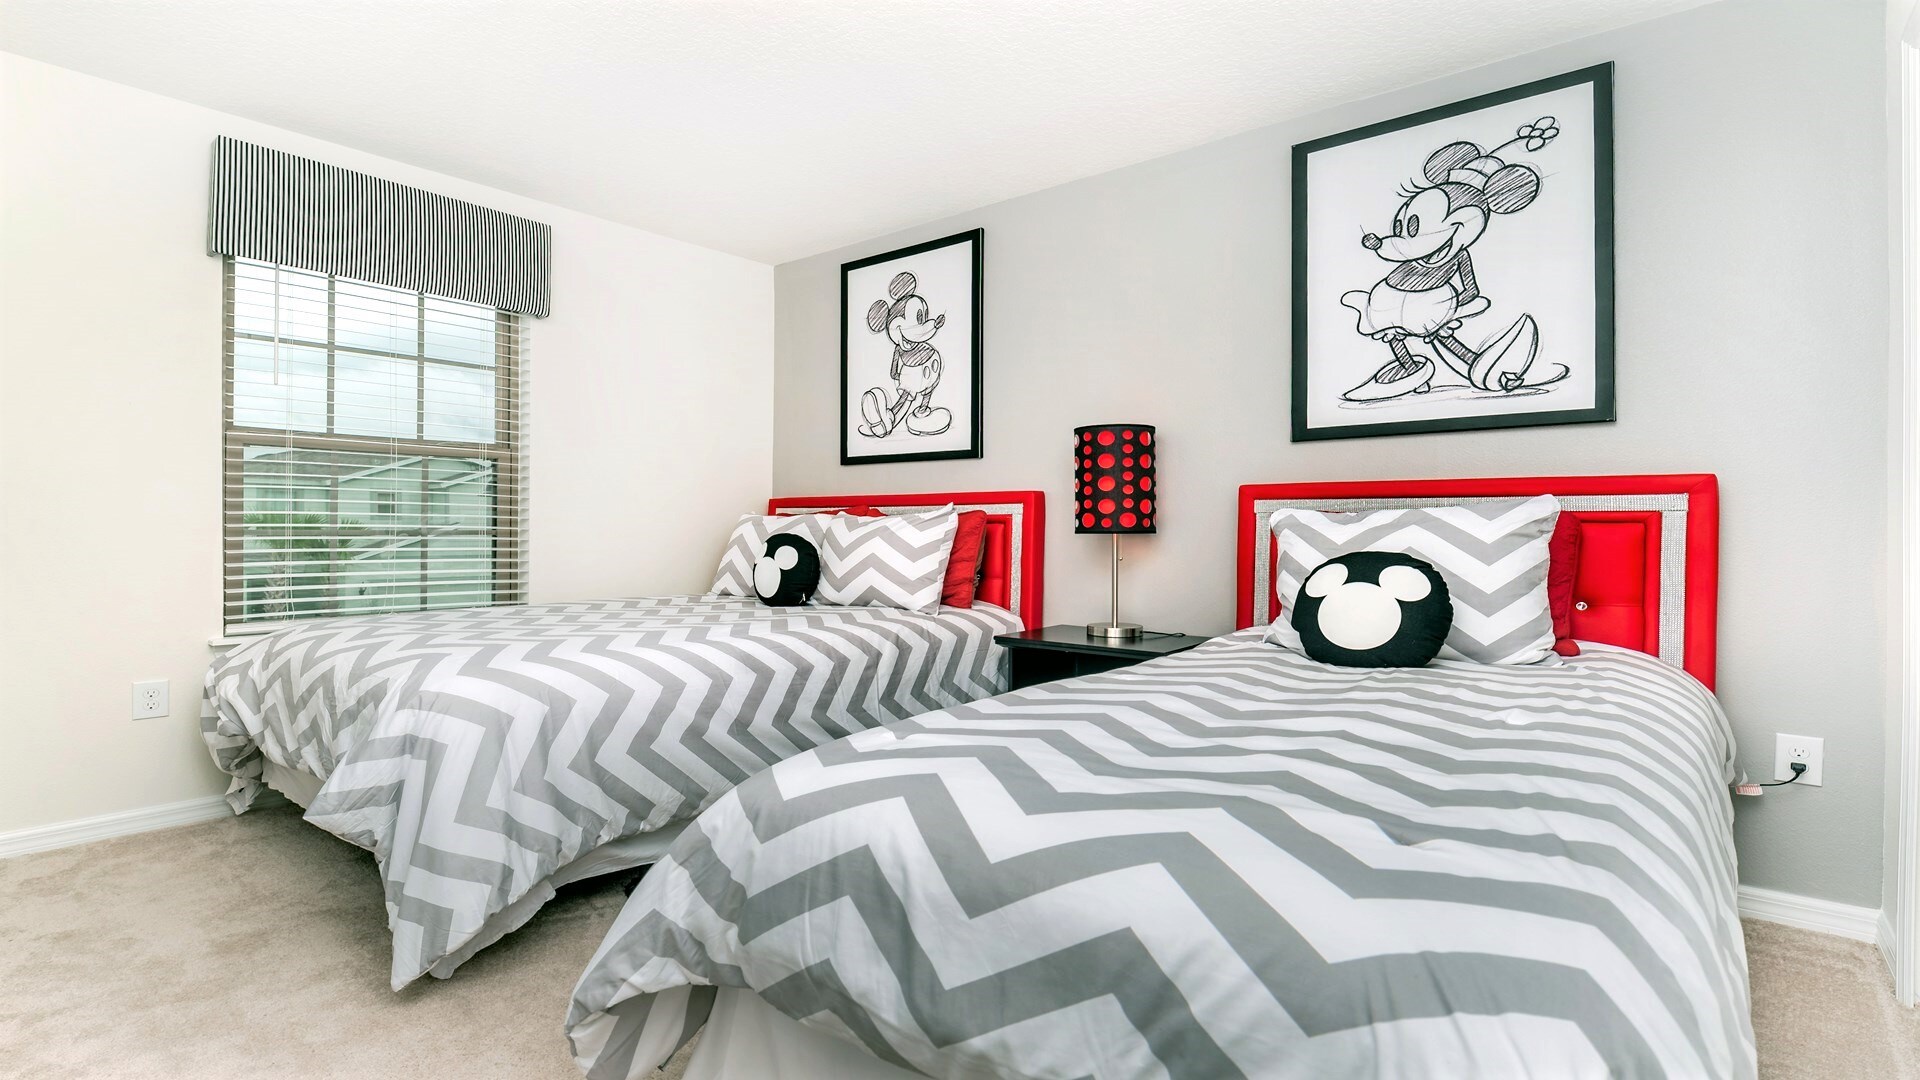 Kids will love the upstairs bedroom with a lovely Mickey theme